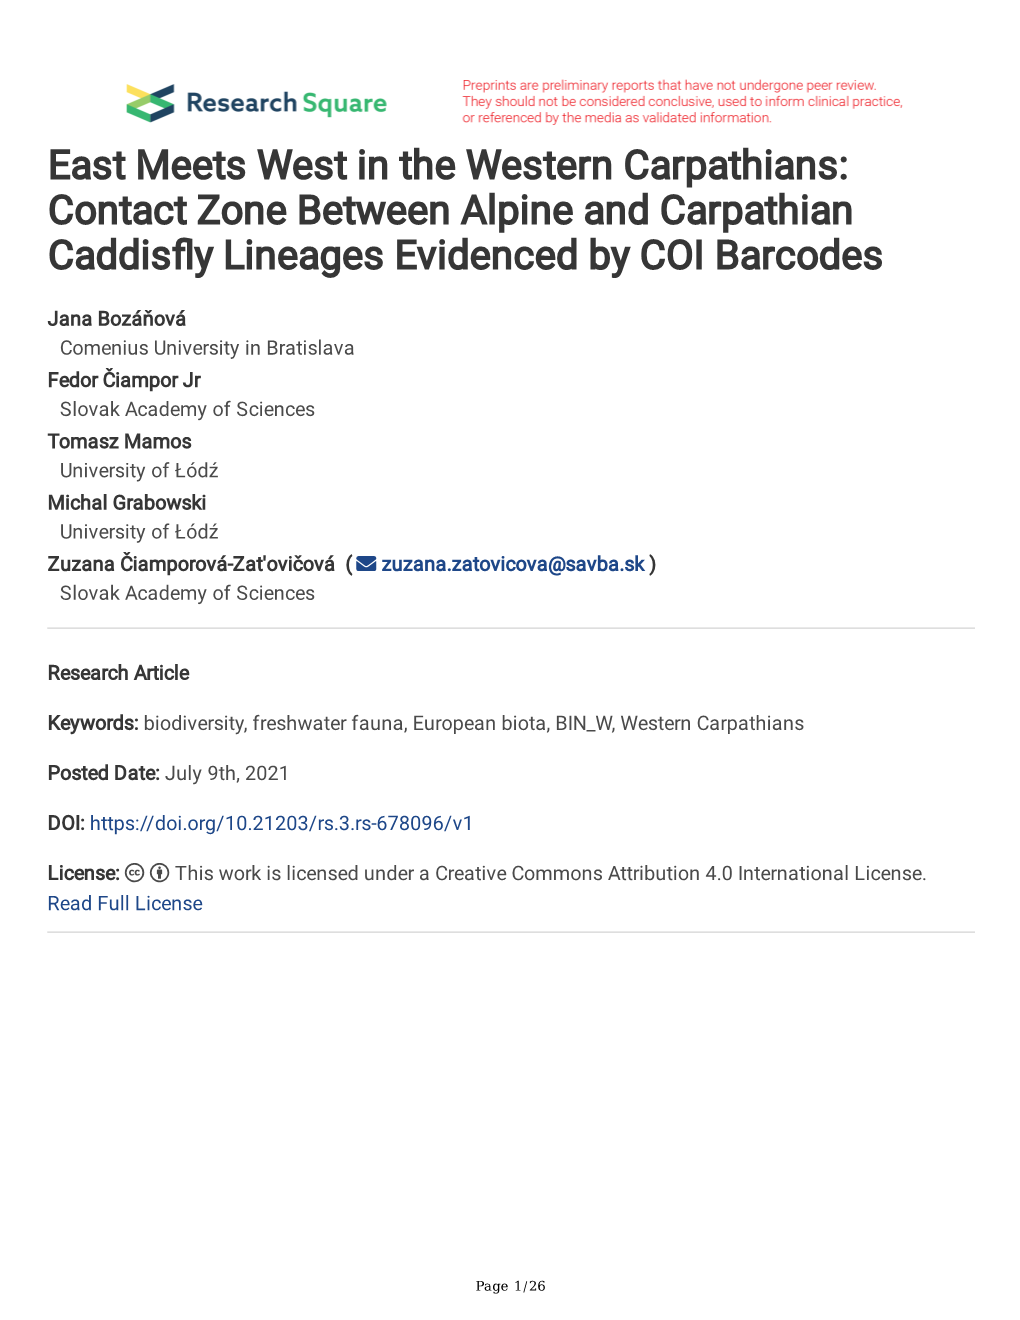 Contact Zone Between Alpine and Carpathian Caddisfy Lineages Evidenced by COI Barcodes